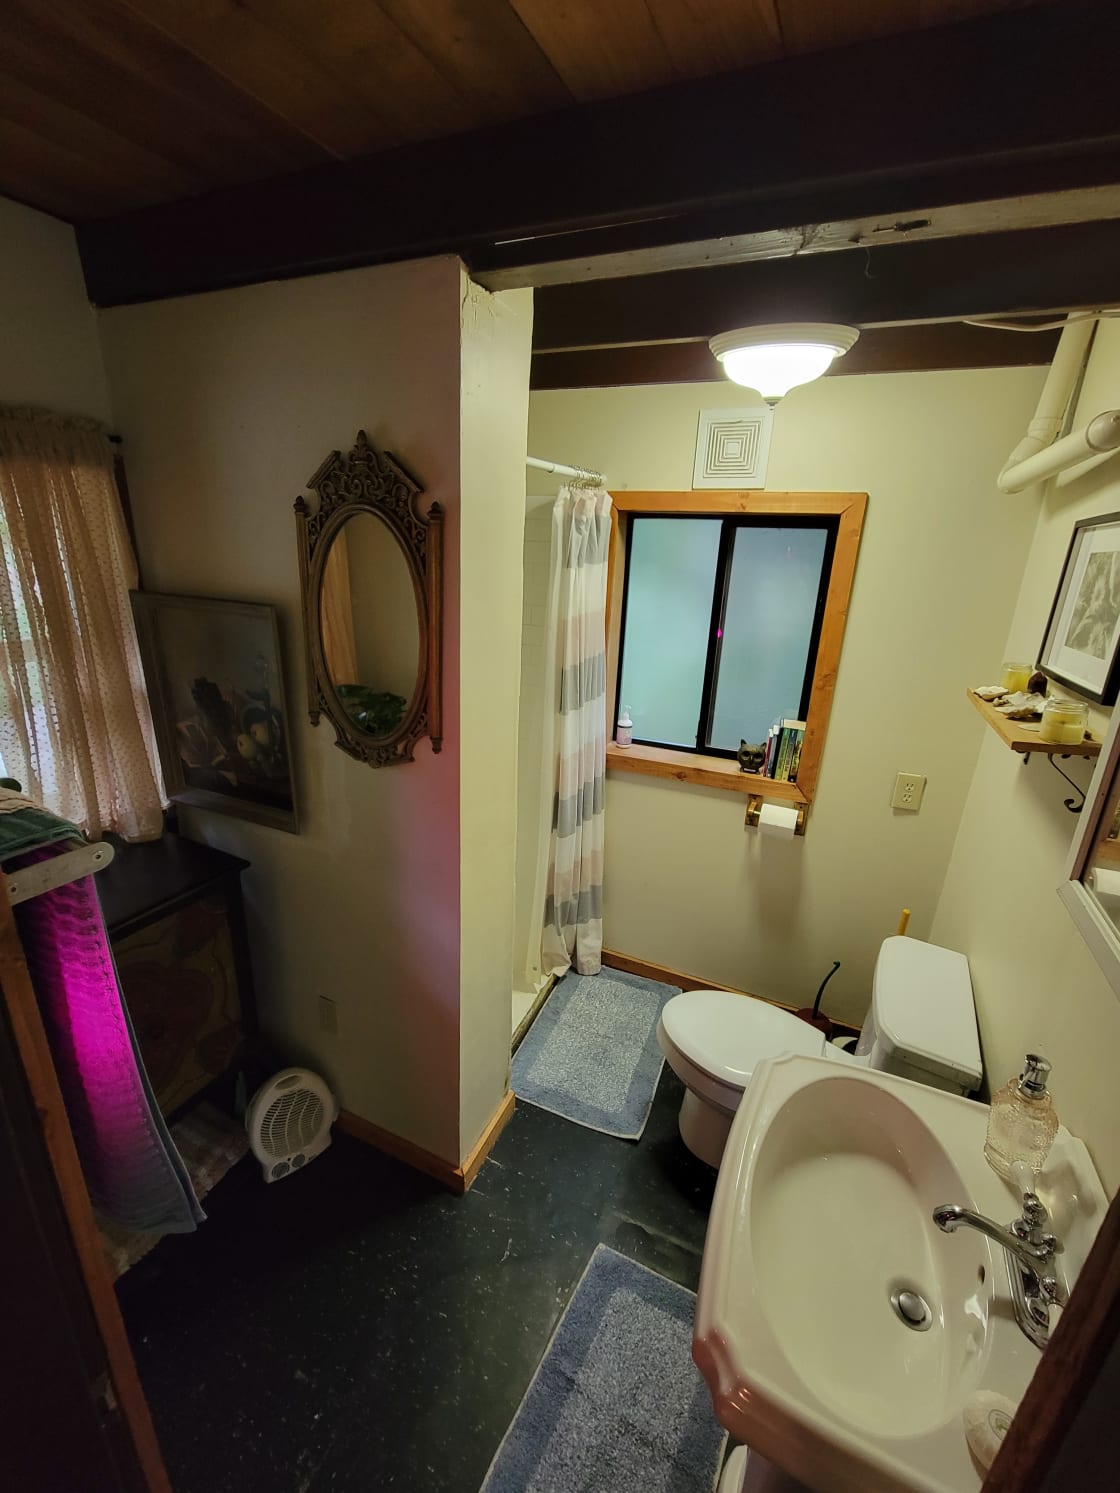 Fully functional bathroom with a shower (and lots of hot water!)